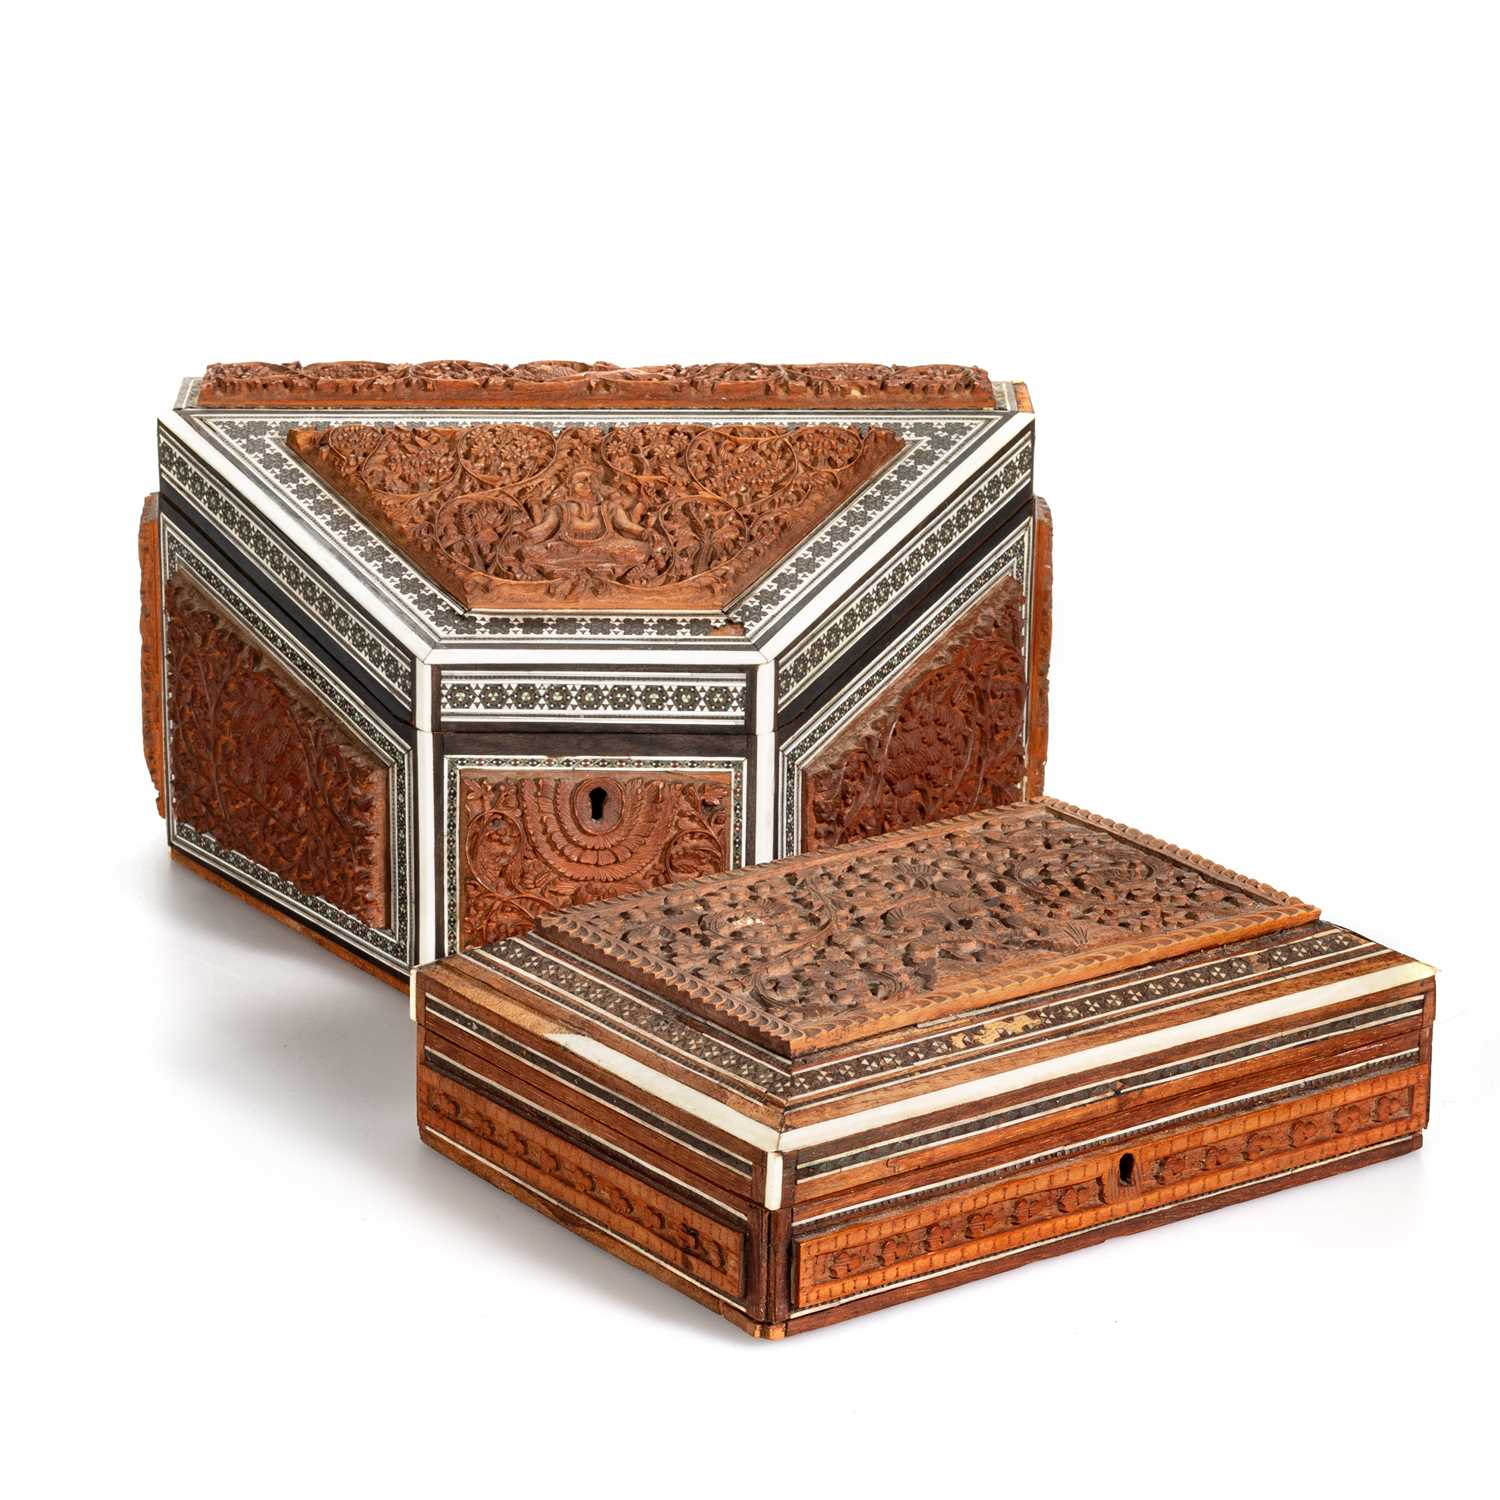 AN ANGLO-INDIAN SADELI AND CARVED SANDALWOOD STATIONARY BOX, PROBABLY BOMBAY, 19TH CENTURY